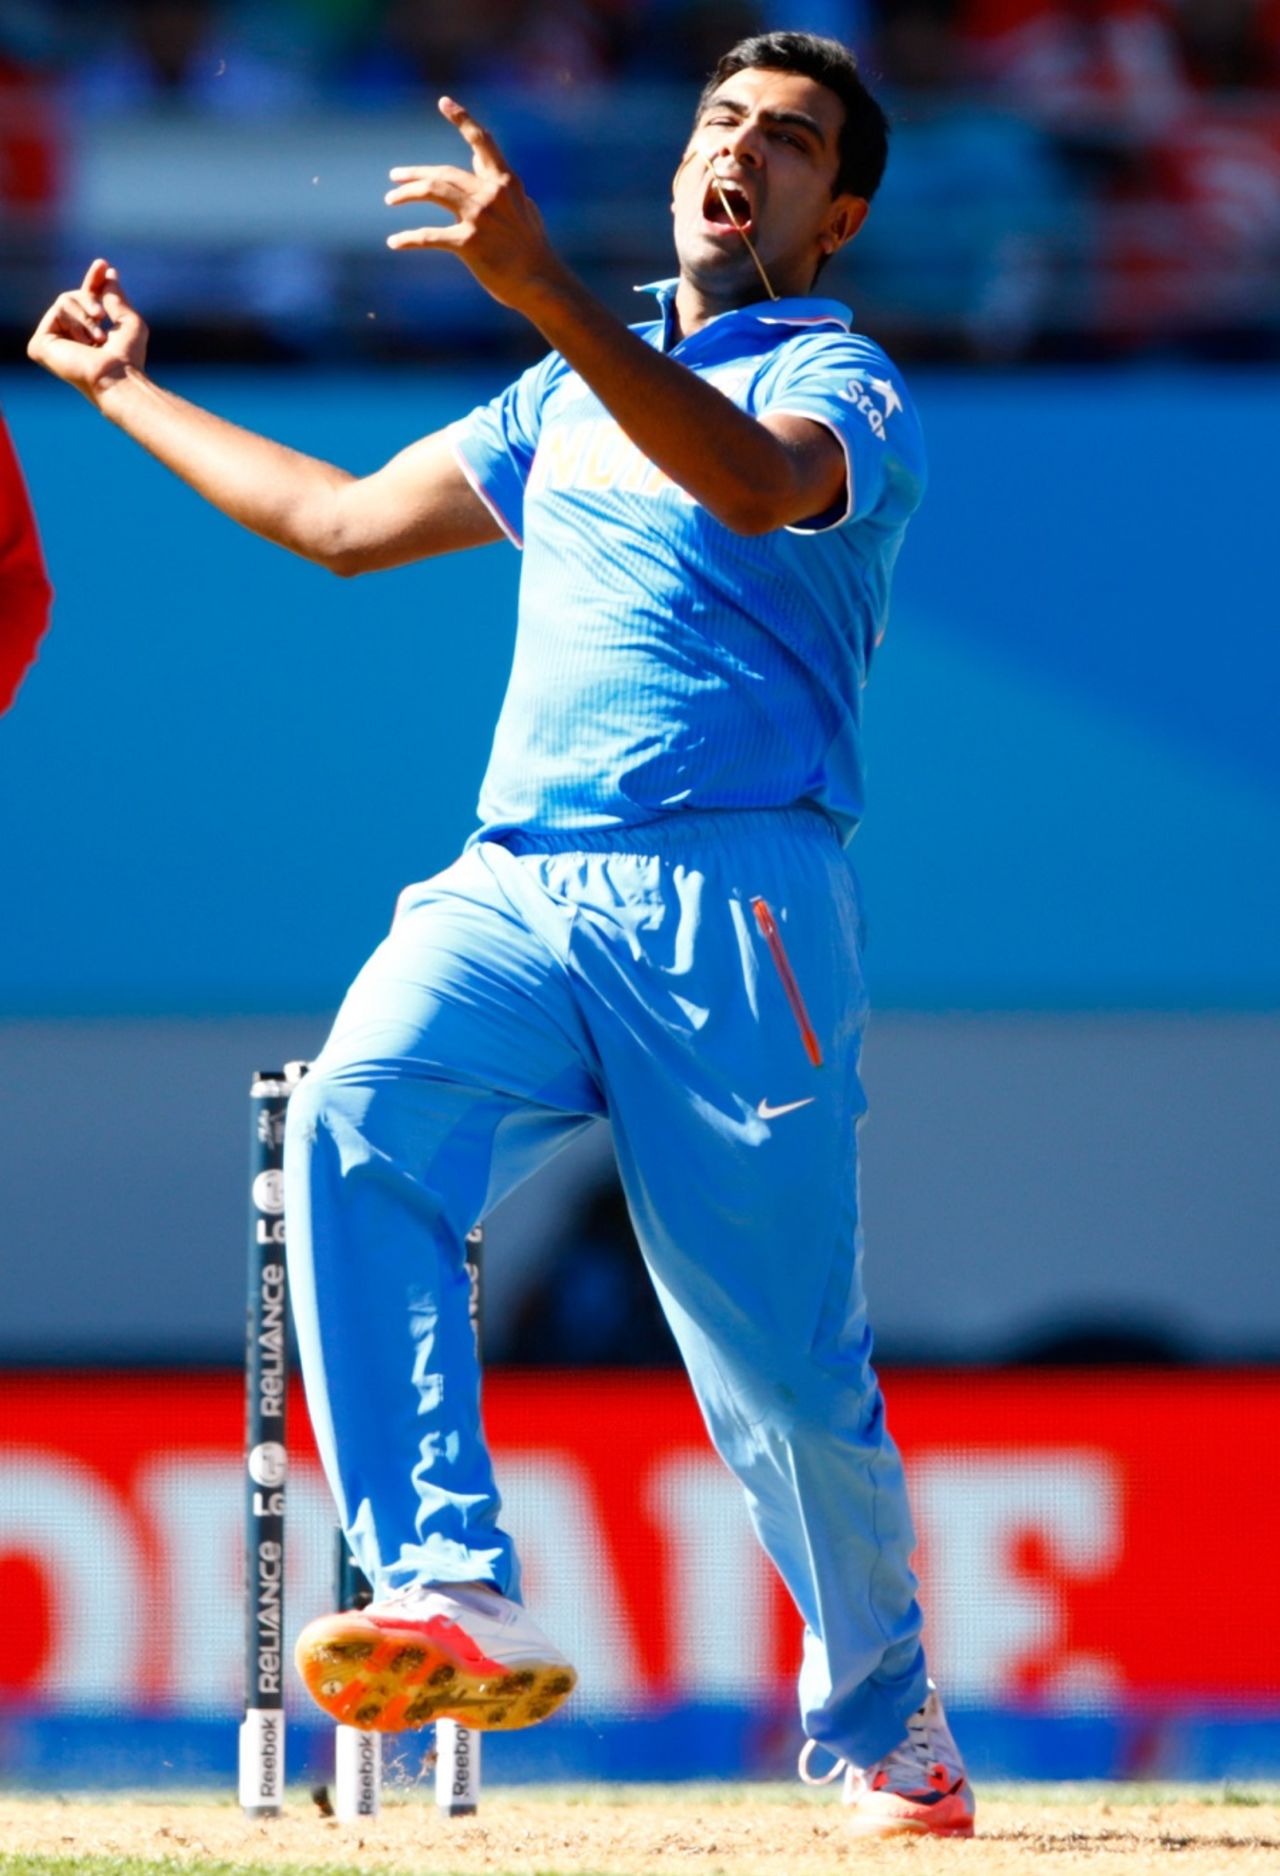 R Ashwin roars after taking a return catch to get rid of Sean Williams, India v Zimbabwe, World Cup 2015, Group B, Auckland, March 14, 2015